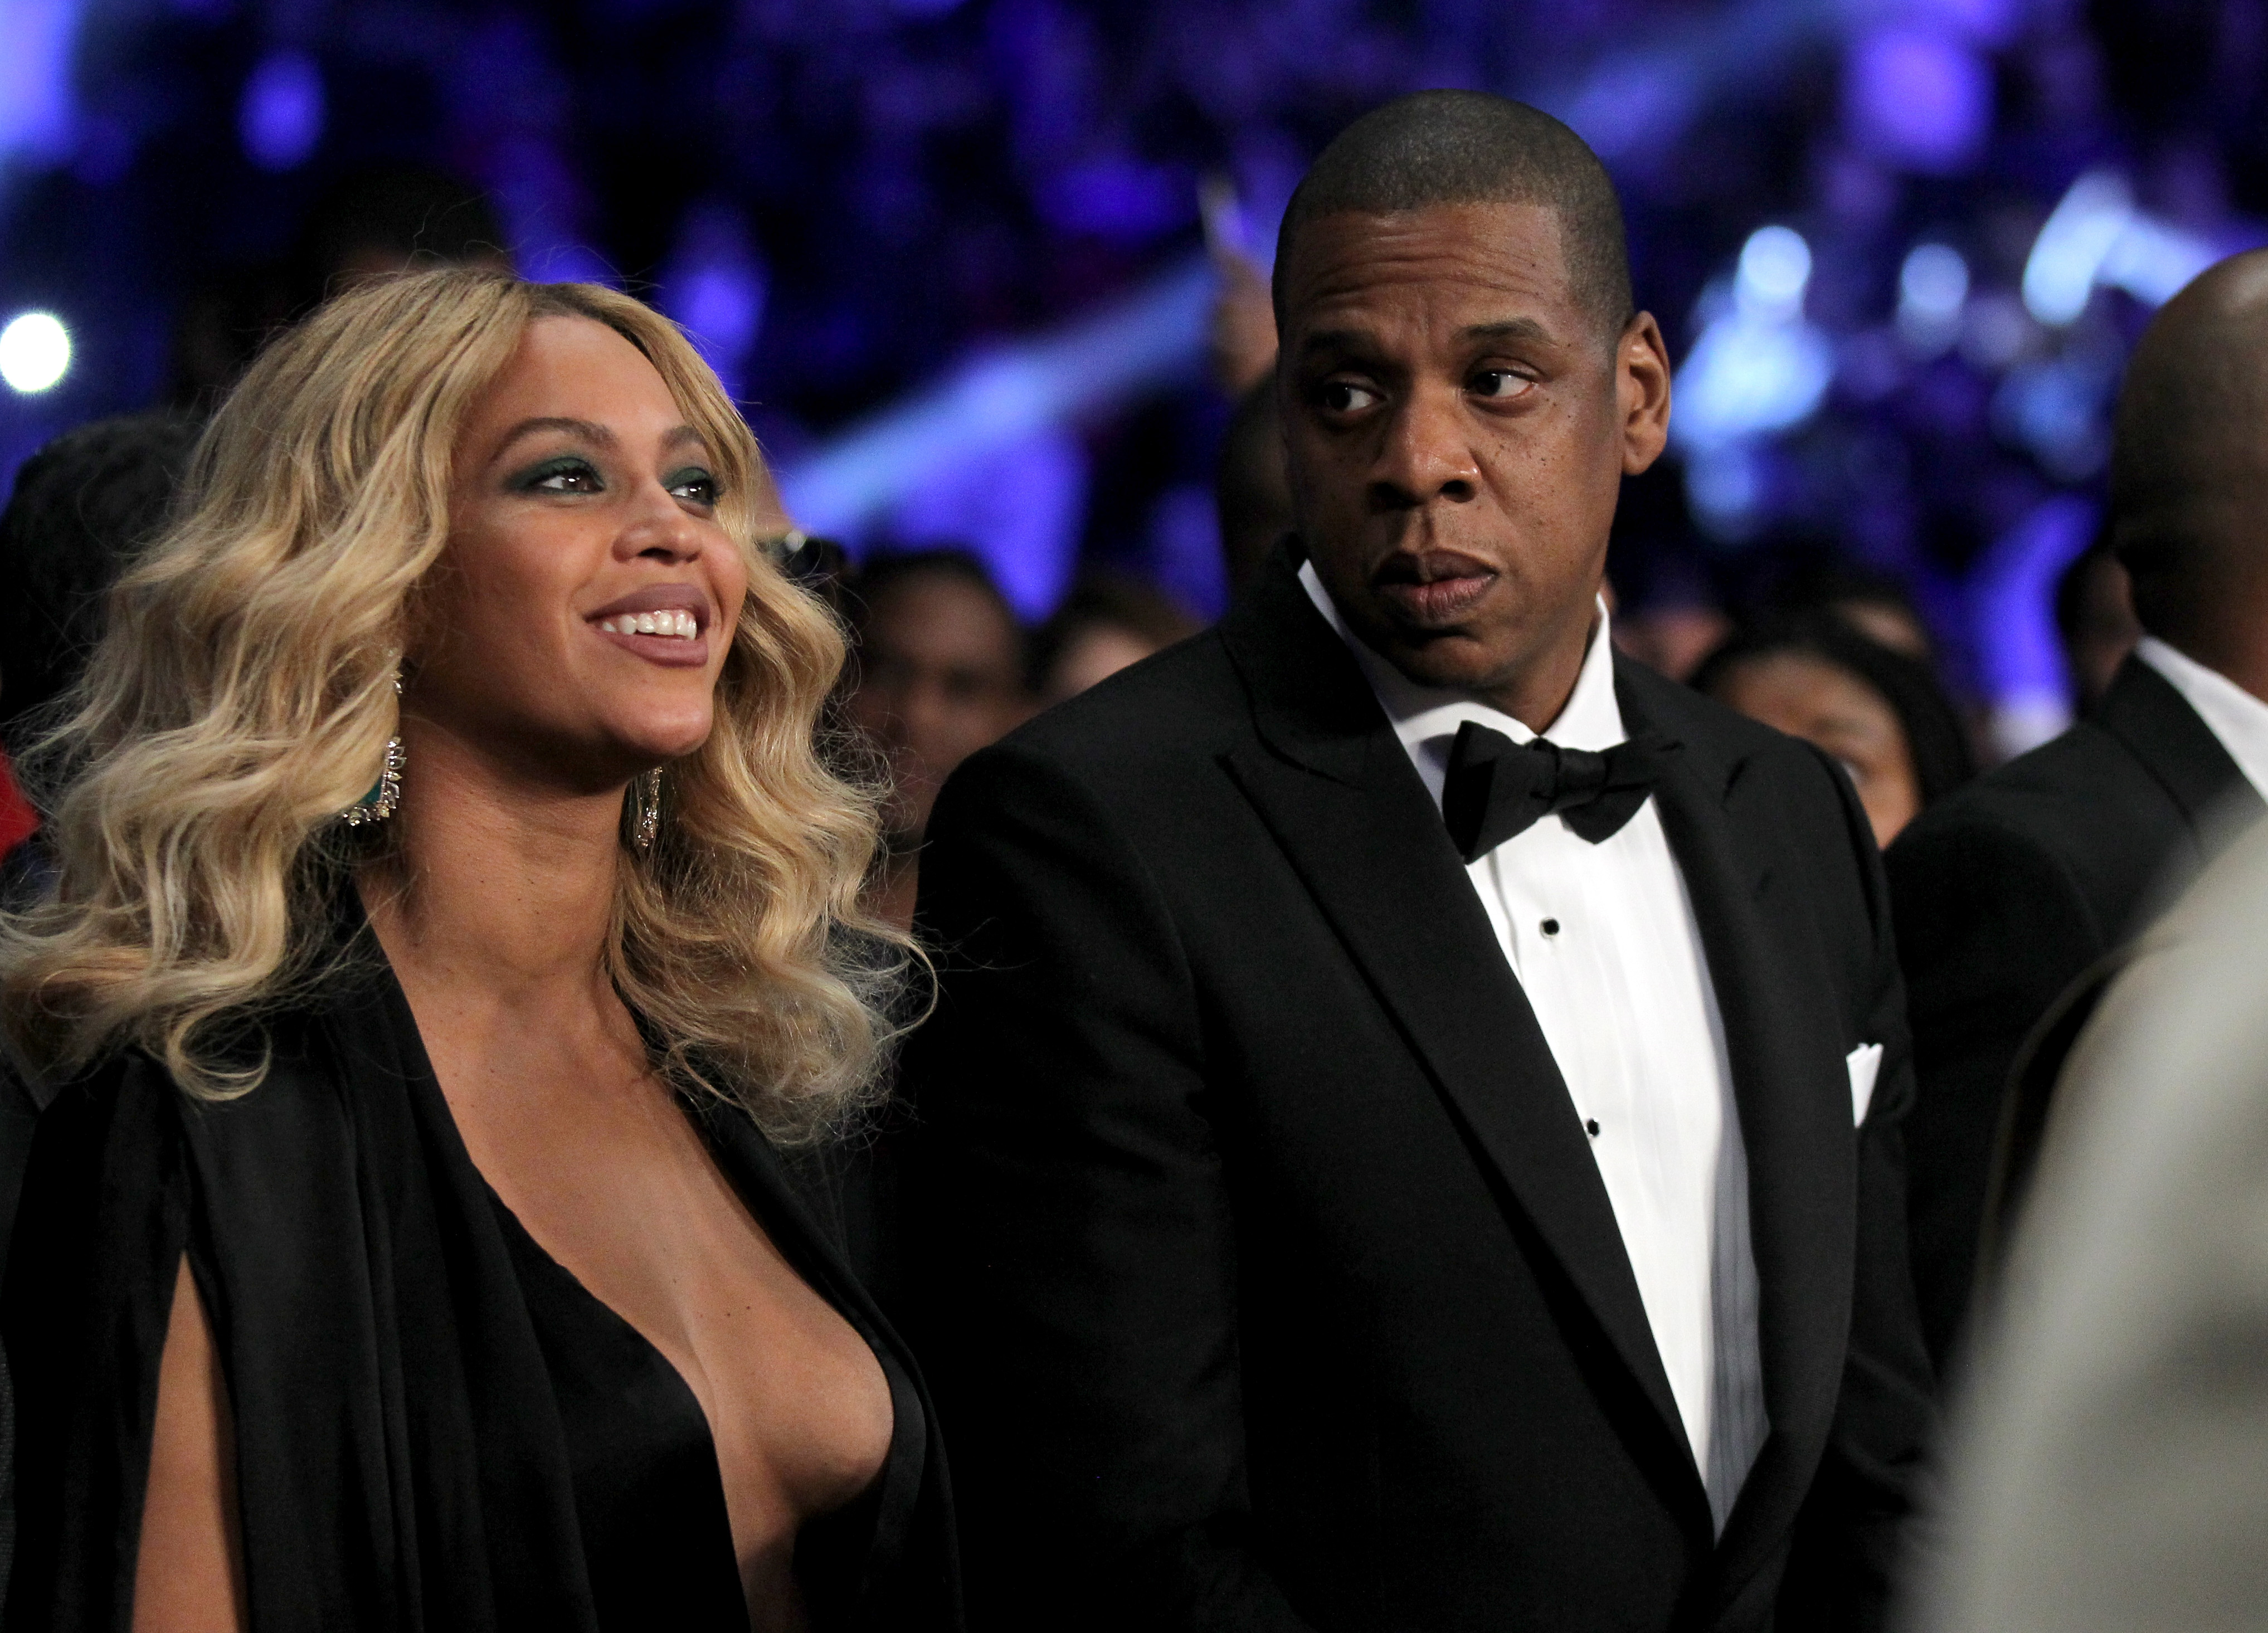 Video Of Beyonce Nudging A Woman For Talking To Jay-Z 